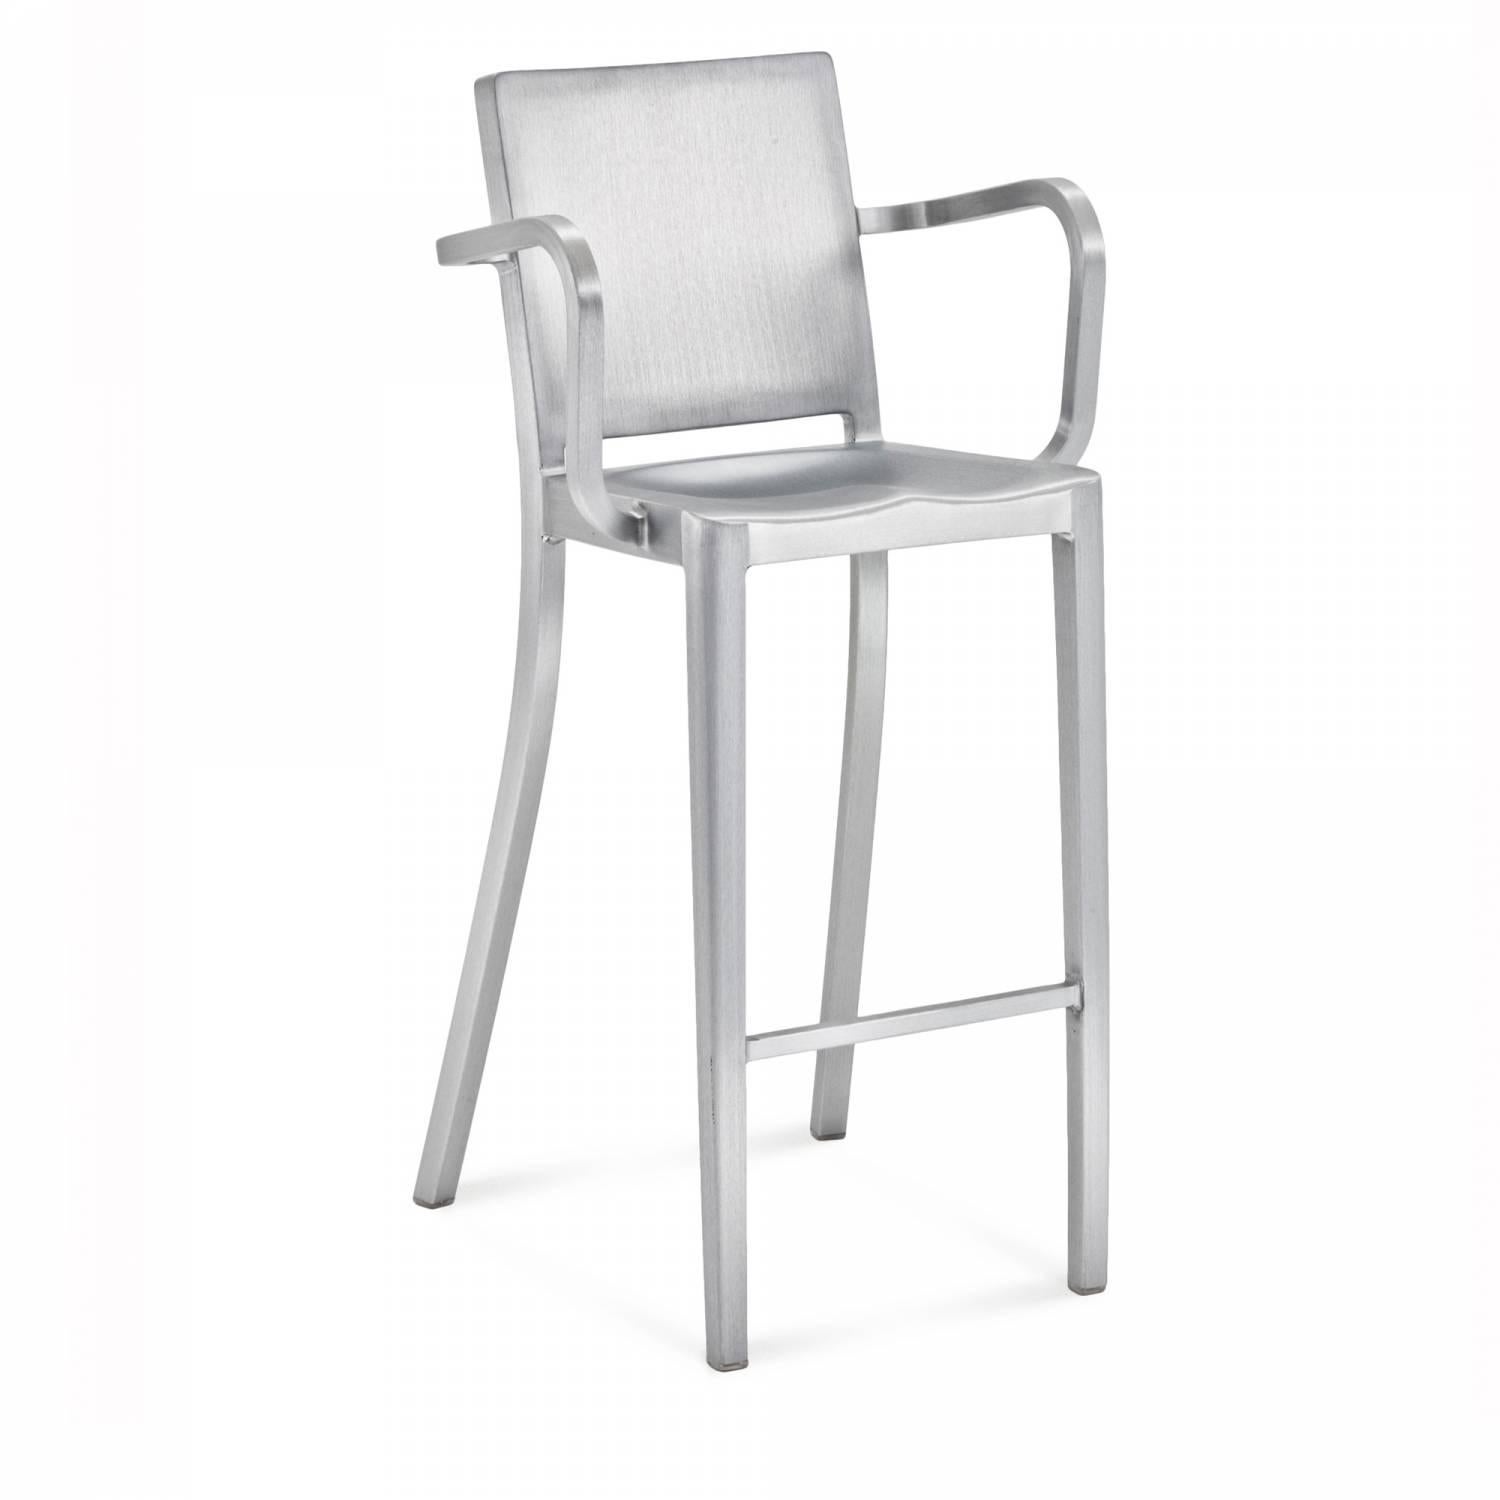 The Hudson, designed for the Hudson hotel in NYC, is Emeco and Starck’s first collaboration. Starck described the chair as “washing the details from the Navy Chair”. It takes an additional 8 hours to polish each Hudson chair. Hudson is in MoMa’s